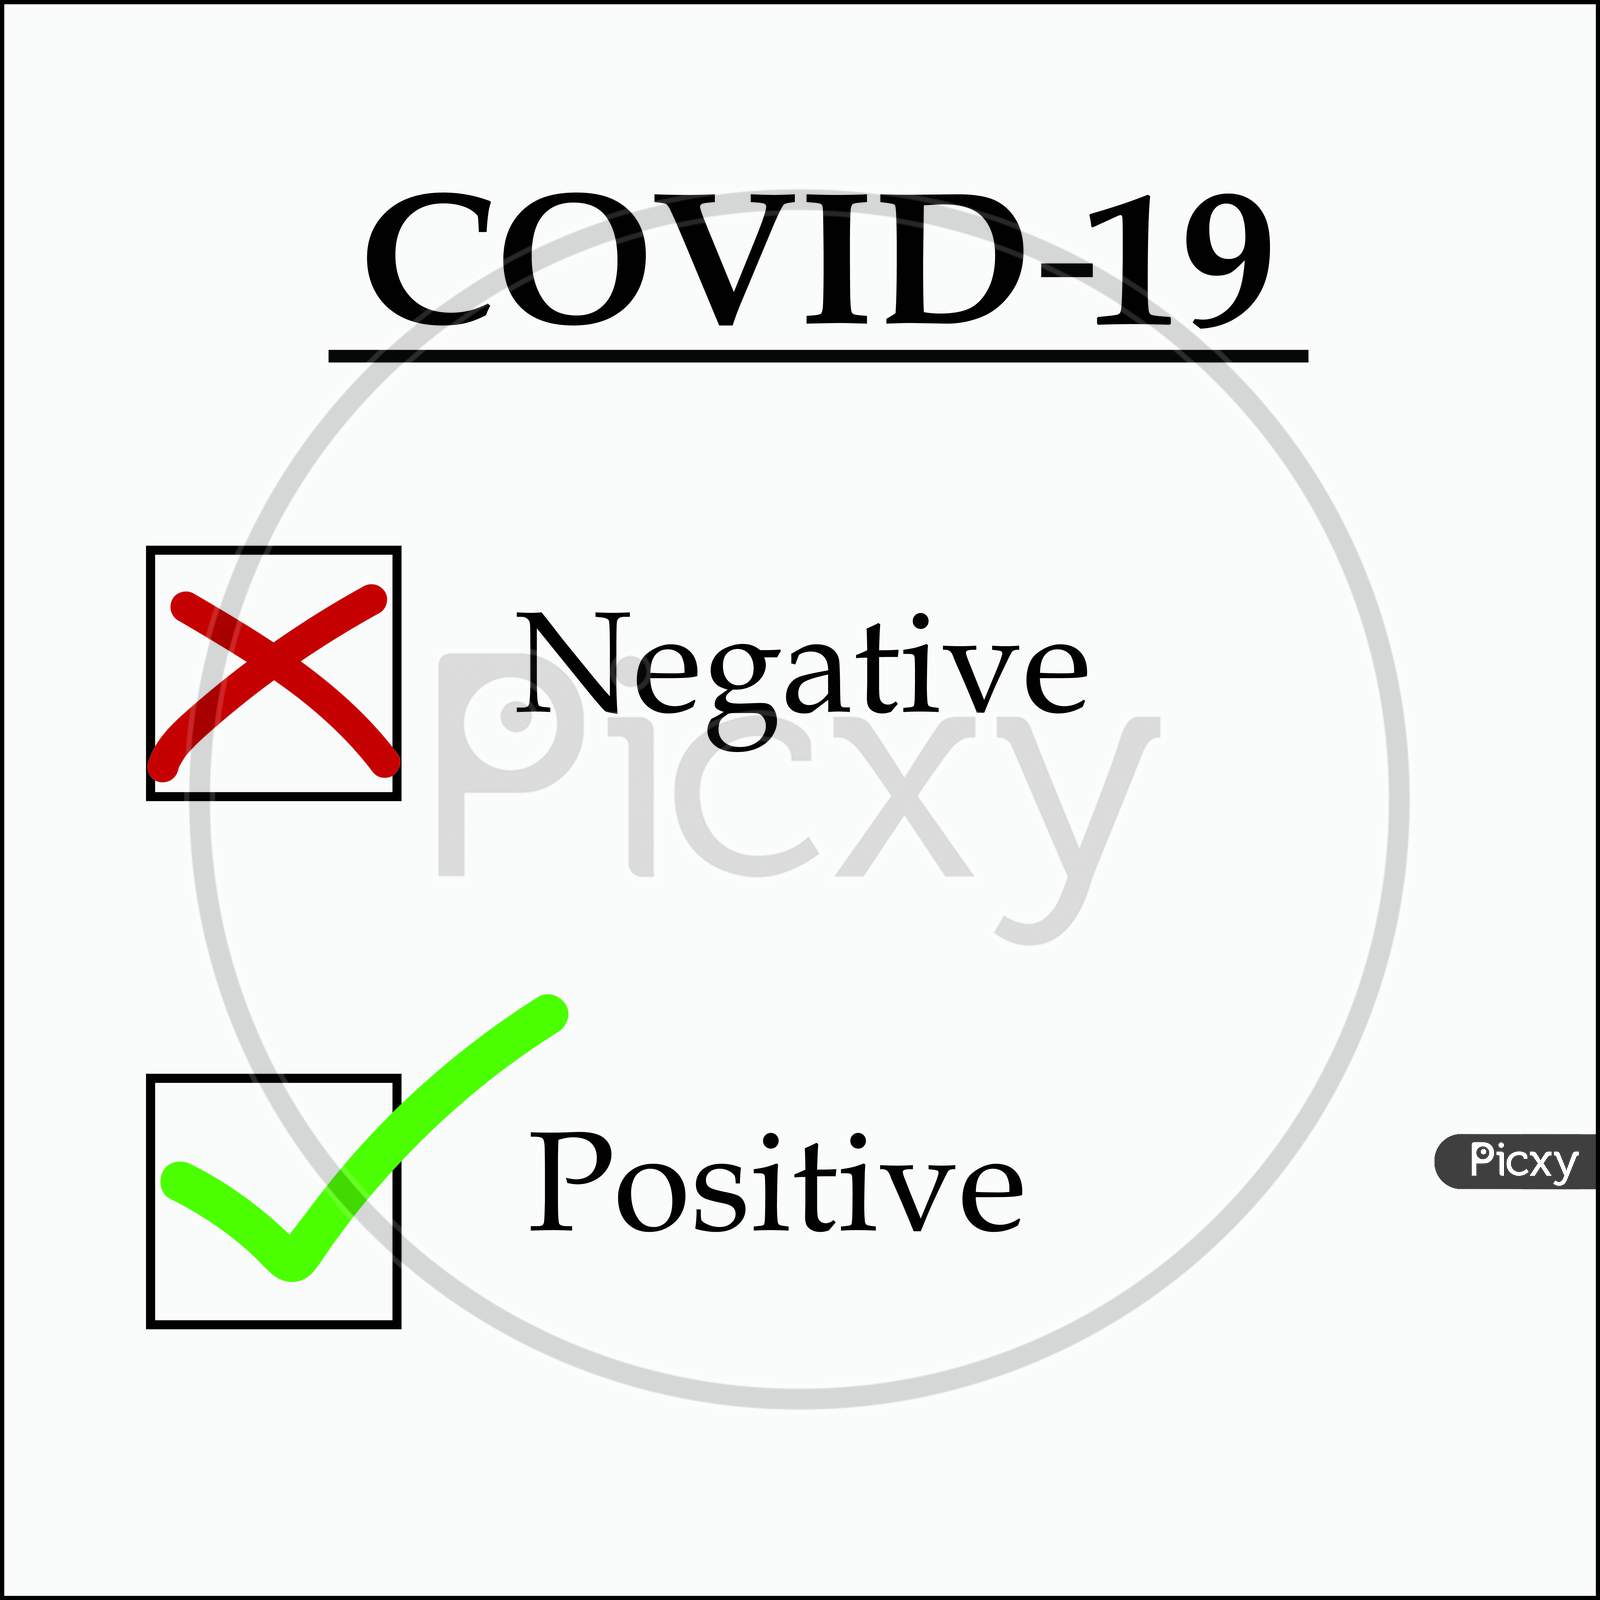 Positive result of Covid - 19 on a white background.